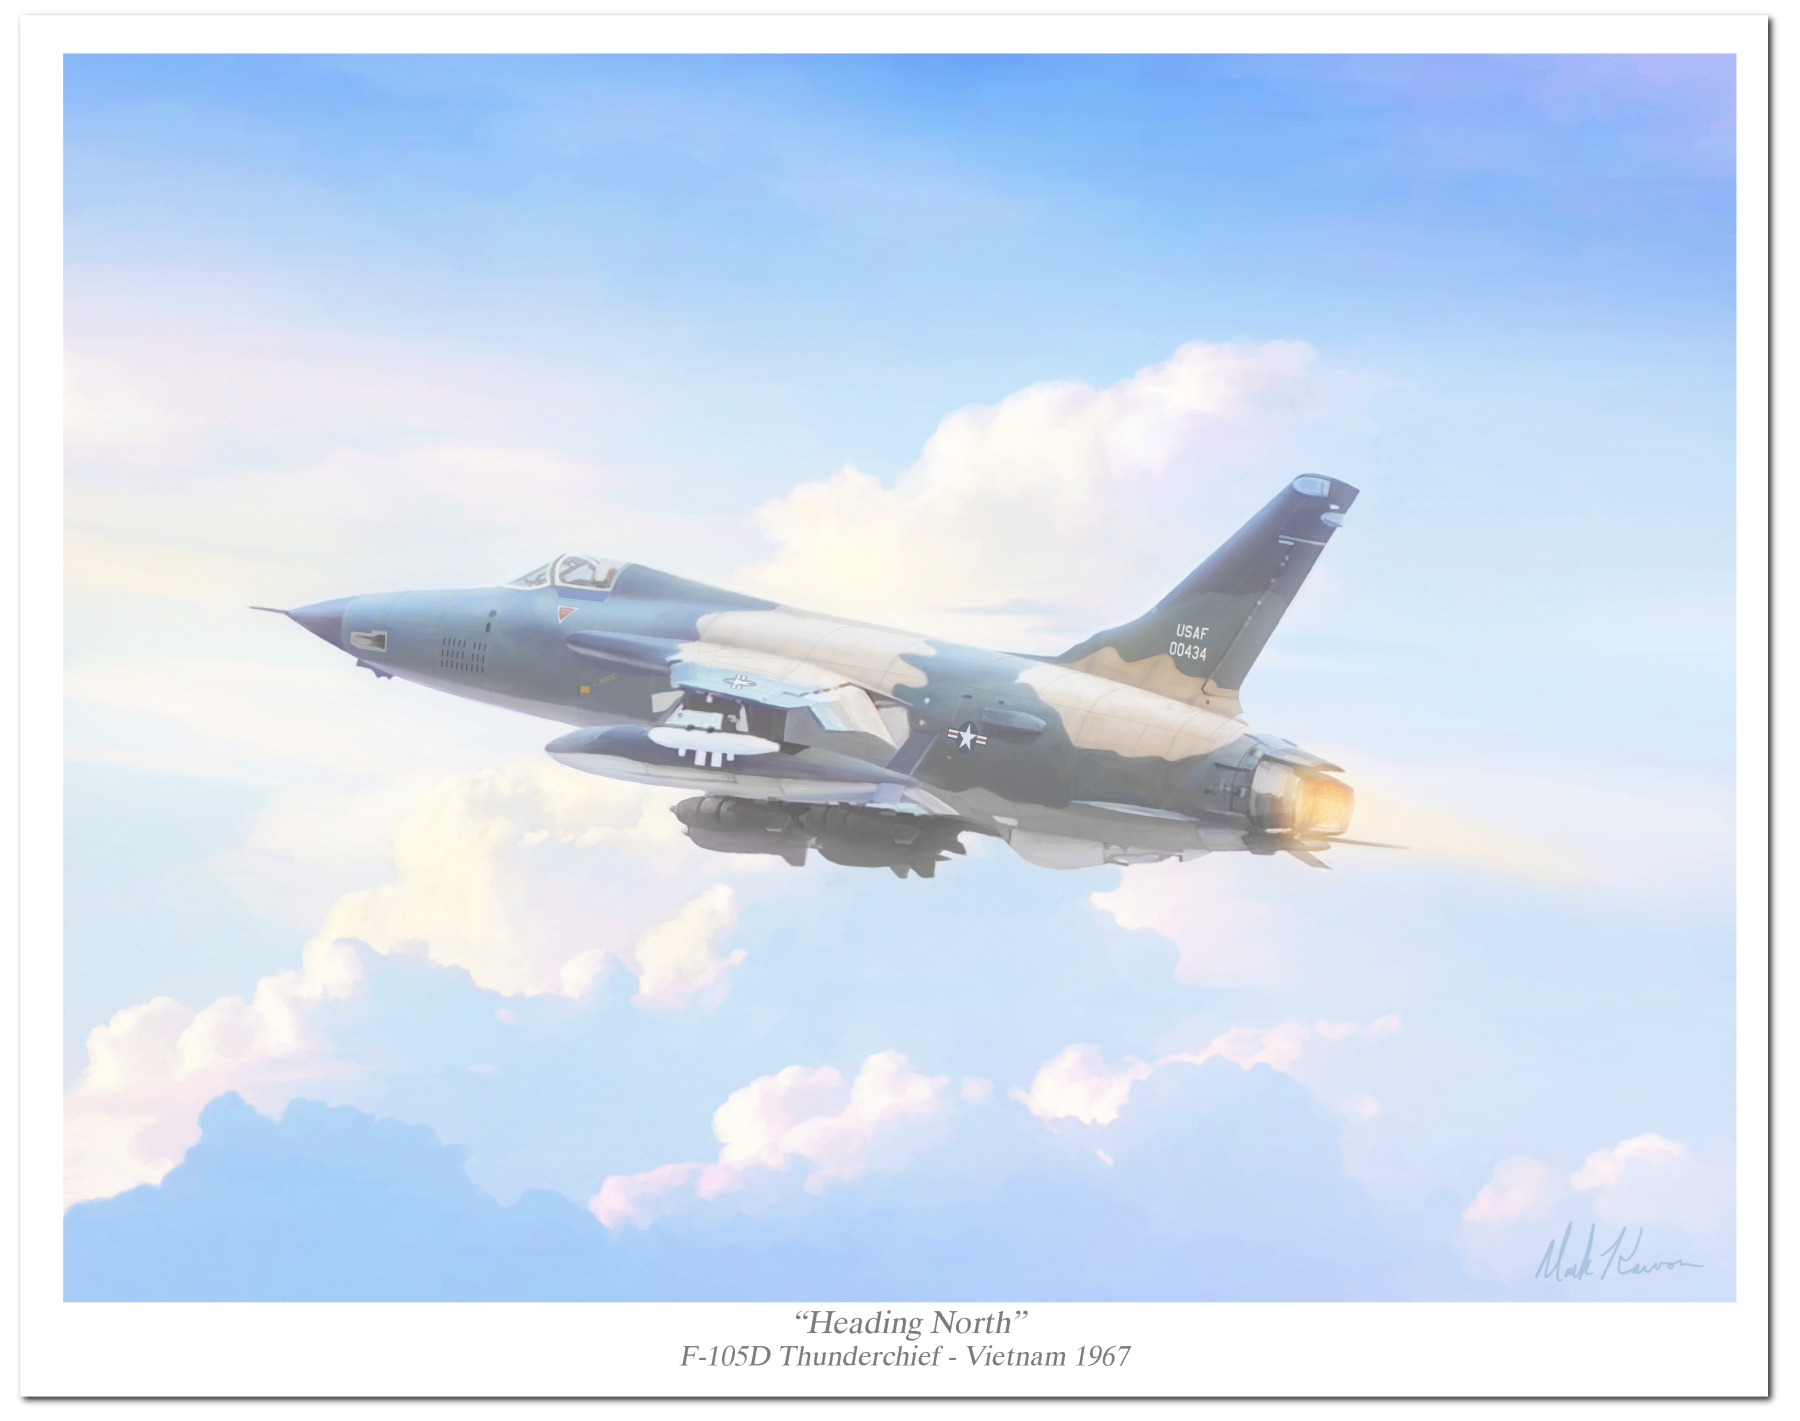 "Heading North" by Mark Karvon featuring the USAF F-100D Thunderchief in Vietnam